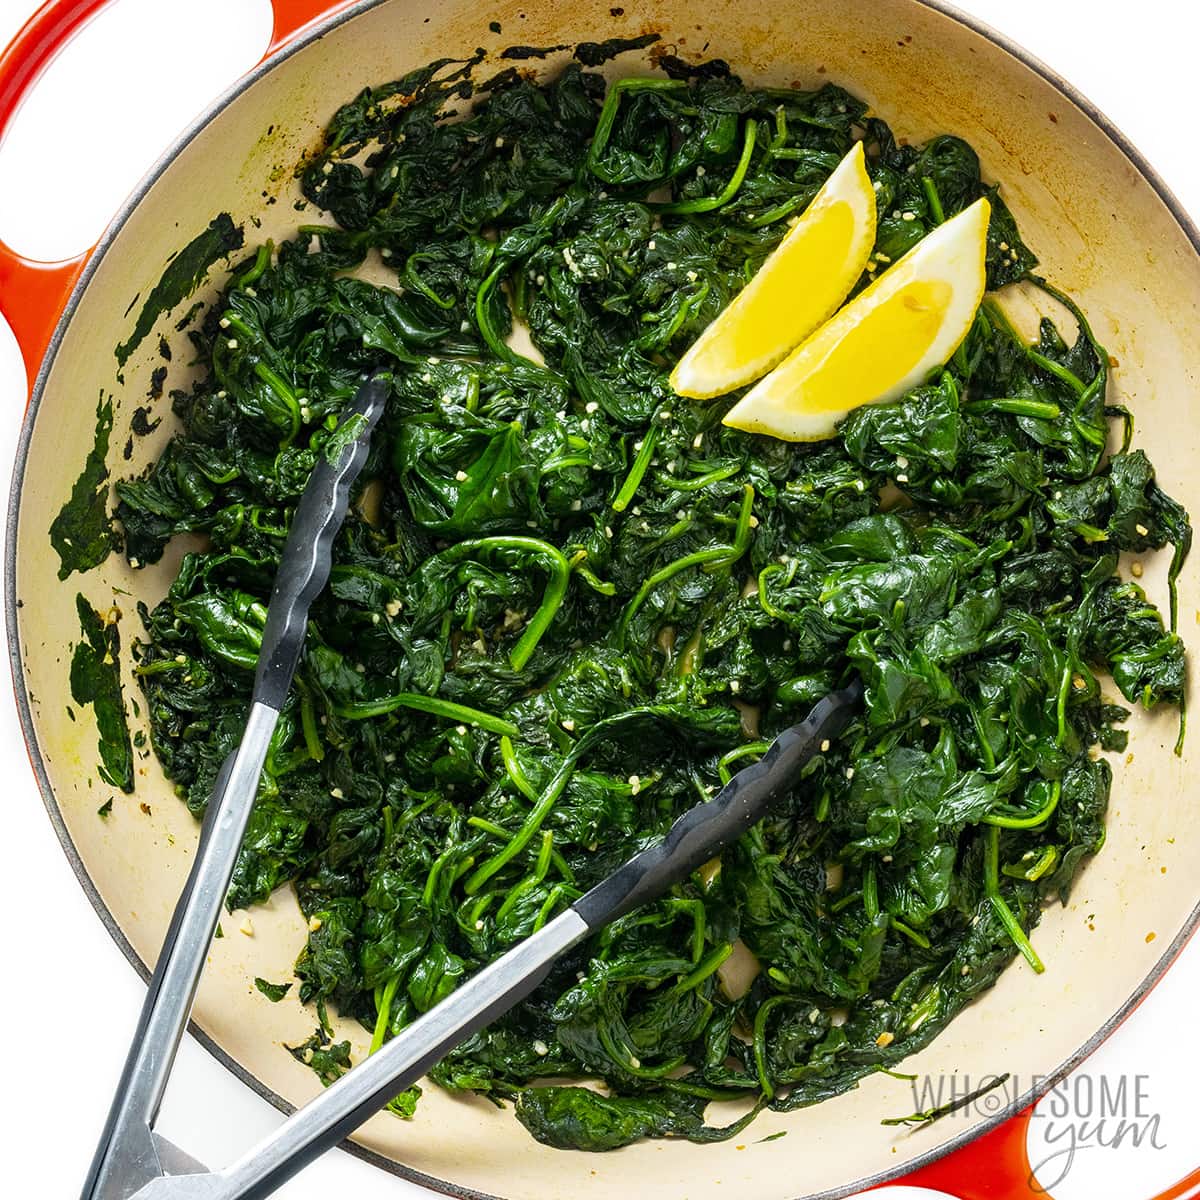 Finished sauteed spinach with garlic, lemon wedges, and tongs.